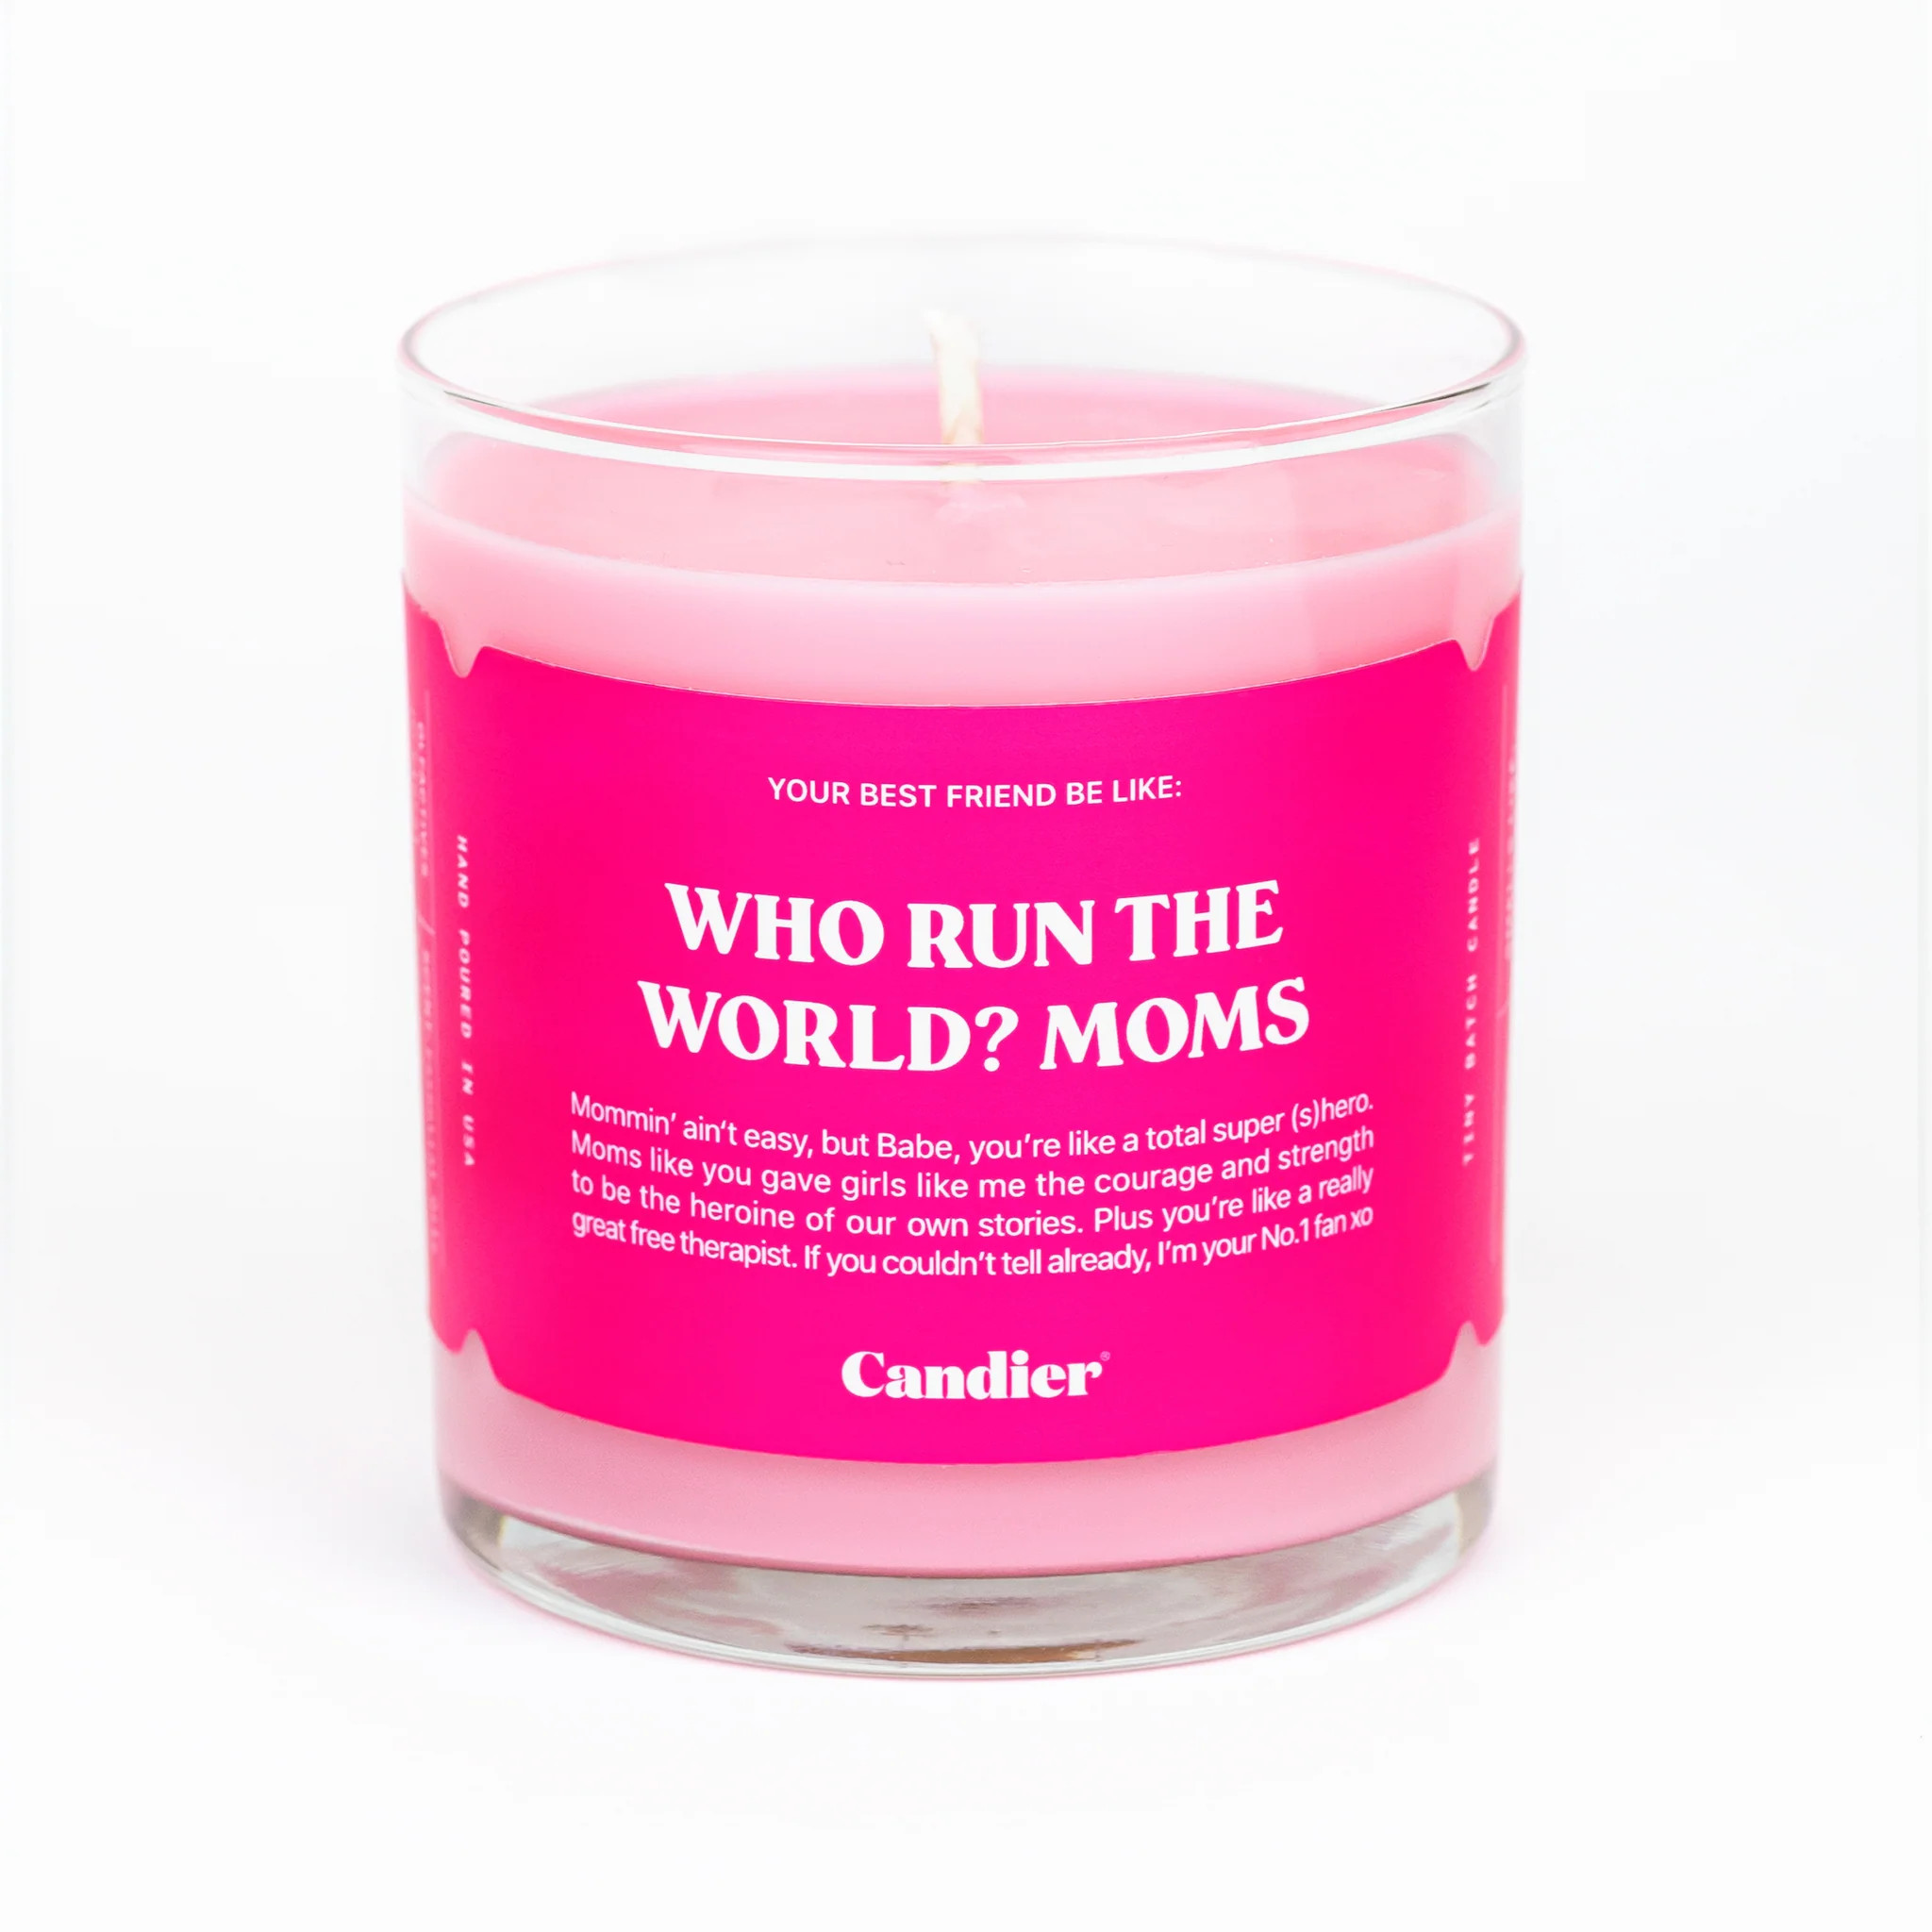 WHO RUN THE WORLD? MOMS. CANDLE | Candier by Ryan Porter